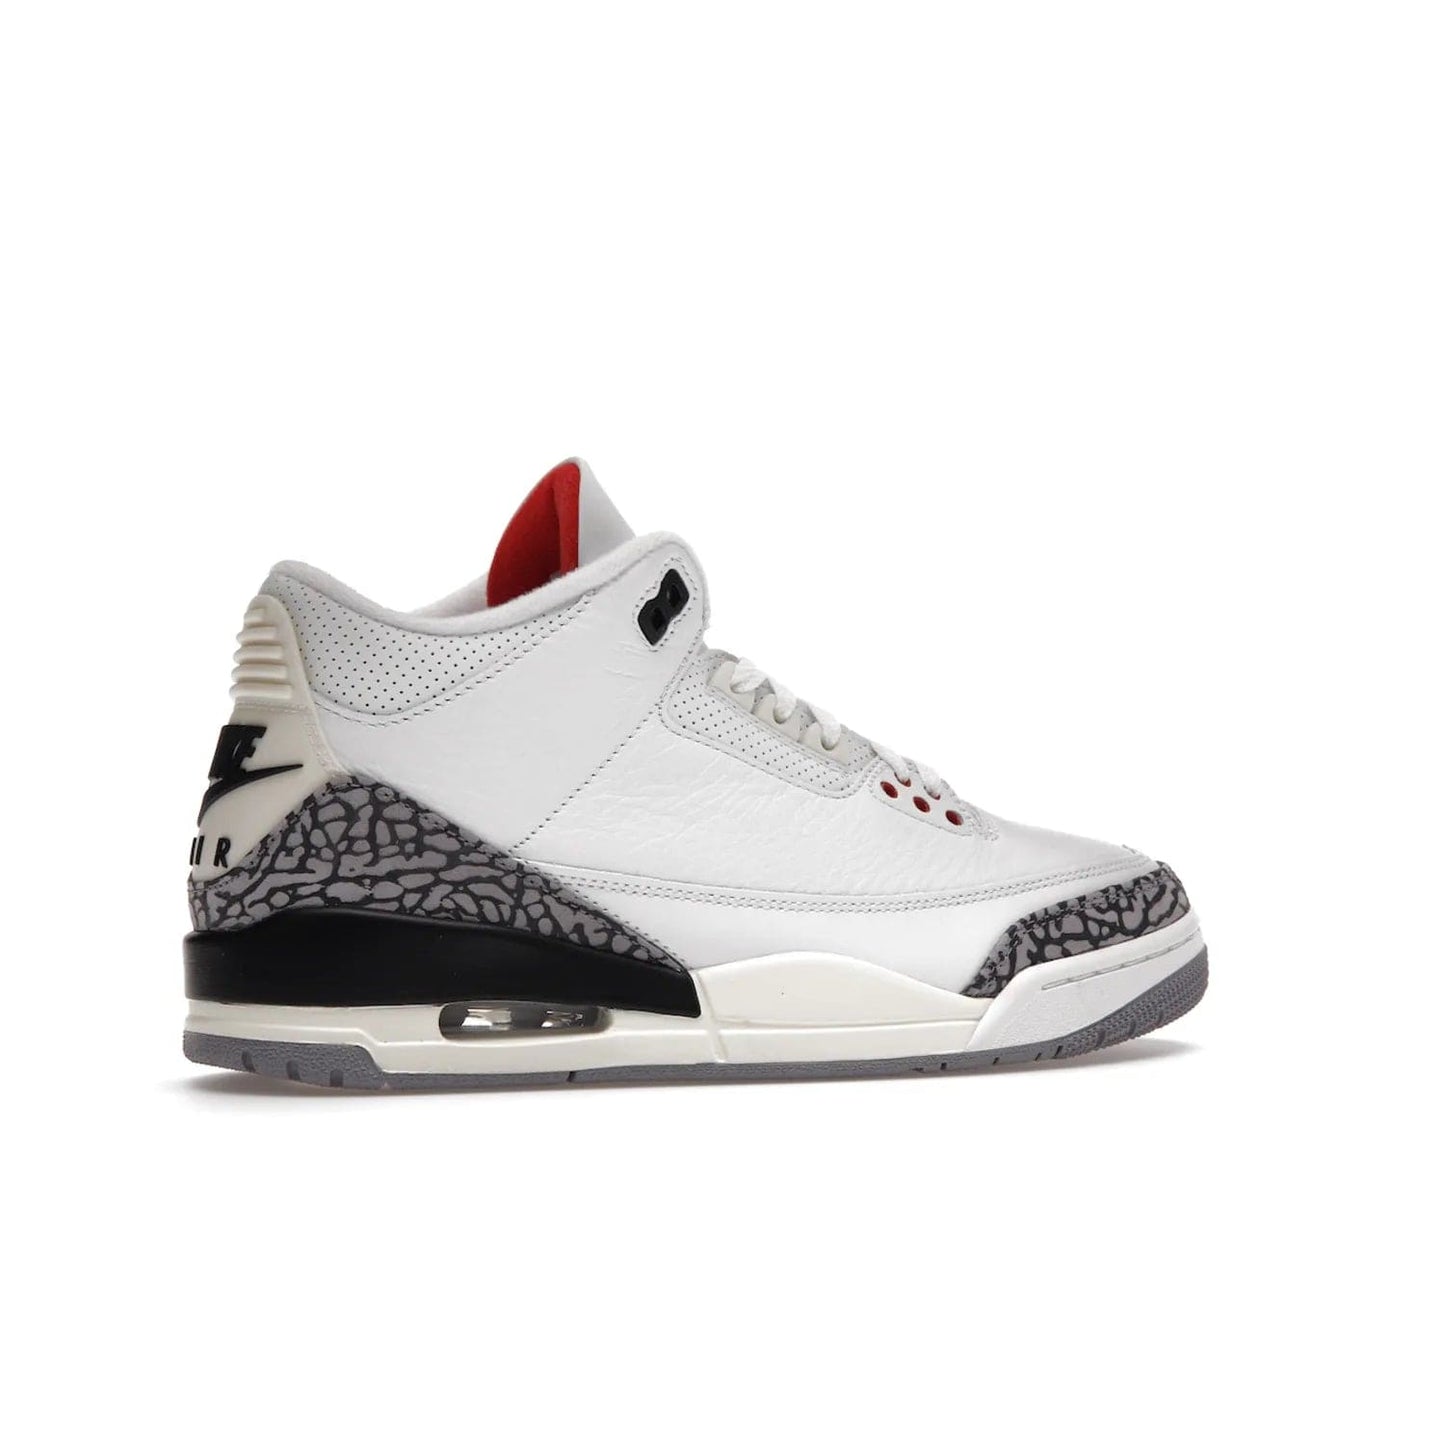 Jordan 3 Retro White Cement Reimagined - Image 35 - Only at www.BallersClubKickz.com - The Reimagined Air Jordan 3 Retro in a Summit White/Fire Red/Black/Cement Grey colorway is launching on March 11, 2023. Featuring a white leather upper, off-white midsoles and heel tabs, this vintage-look sneaker is a must-have.